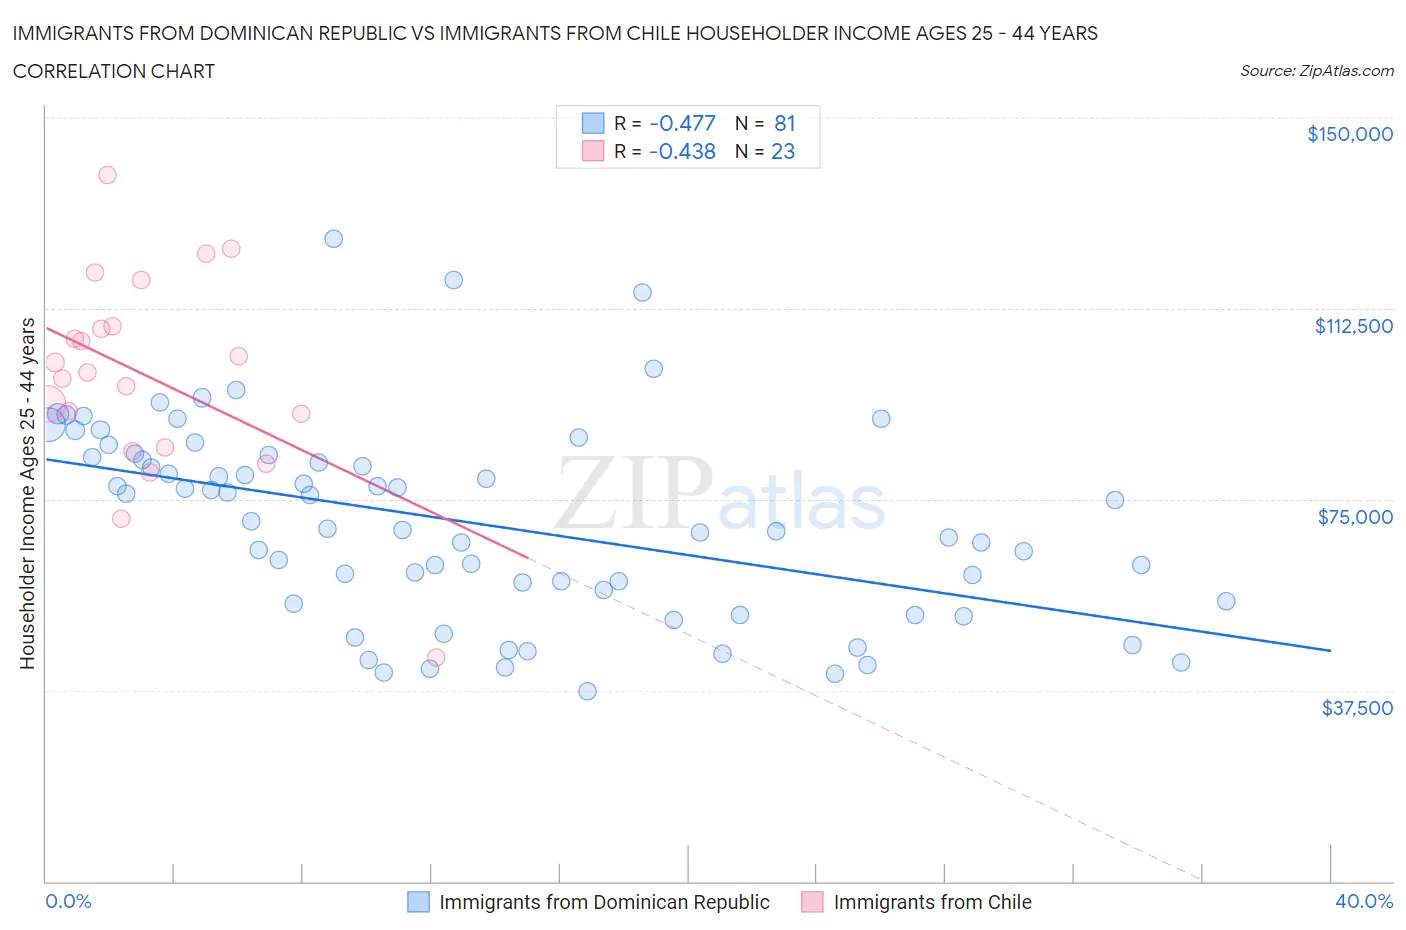 Immigrants from Dominican Republic vs Immigrants from Chile Householder Income Ages 25 - 44 years